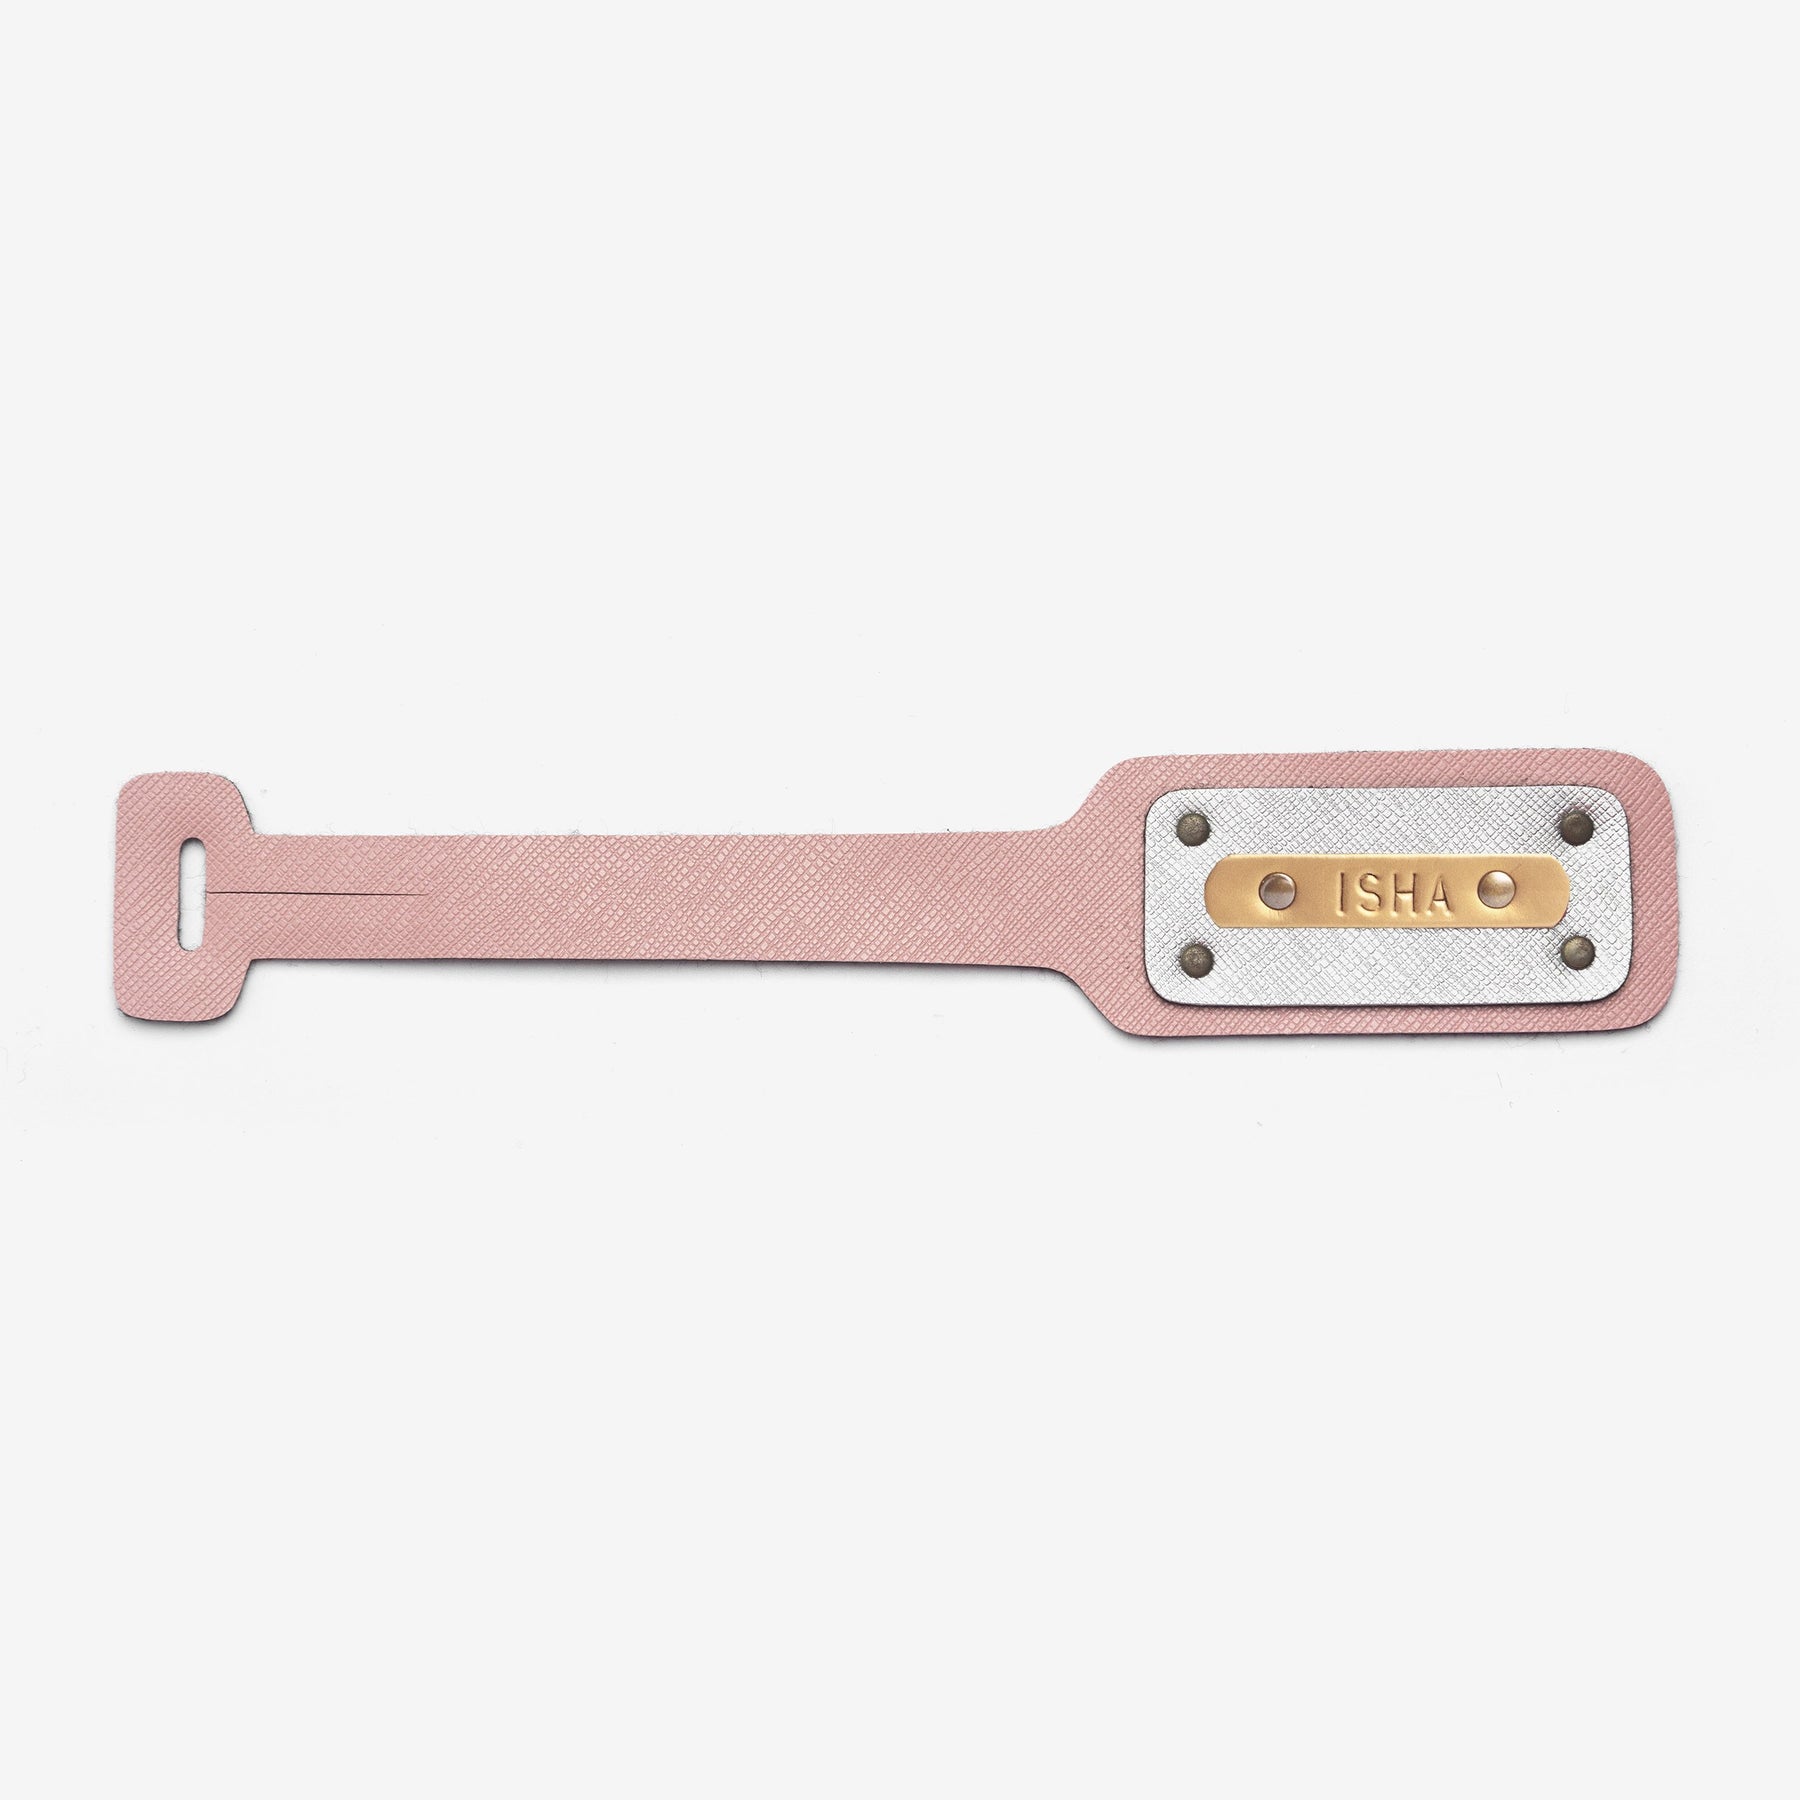 The Messy Corner Luggage Tag Personalised Leather Luggage/Baggage Tag - Salmon Pink and Silver